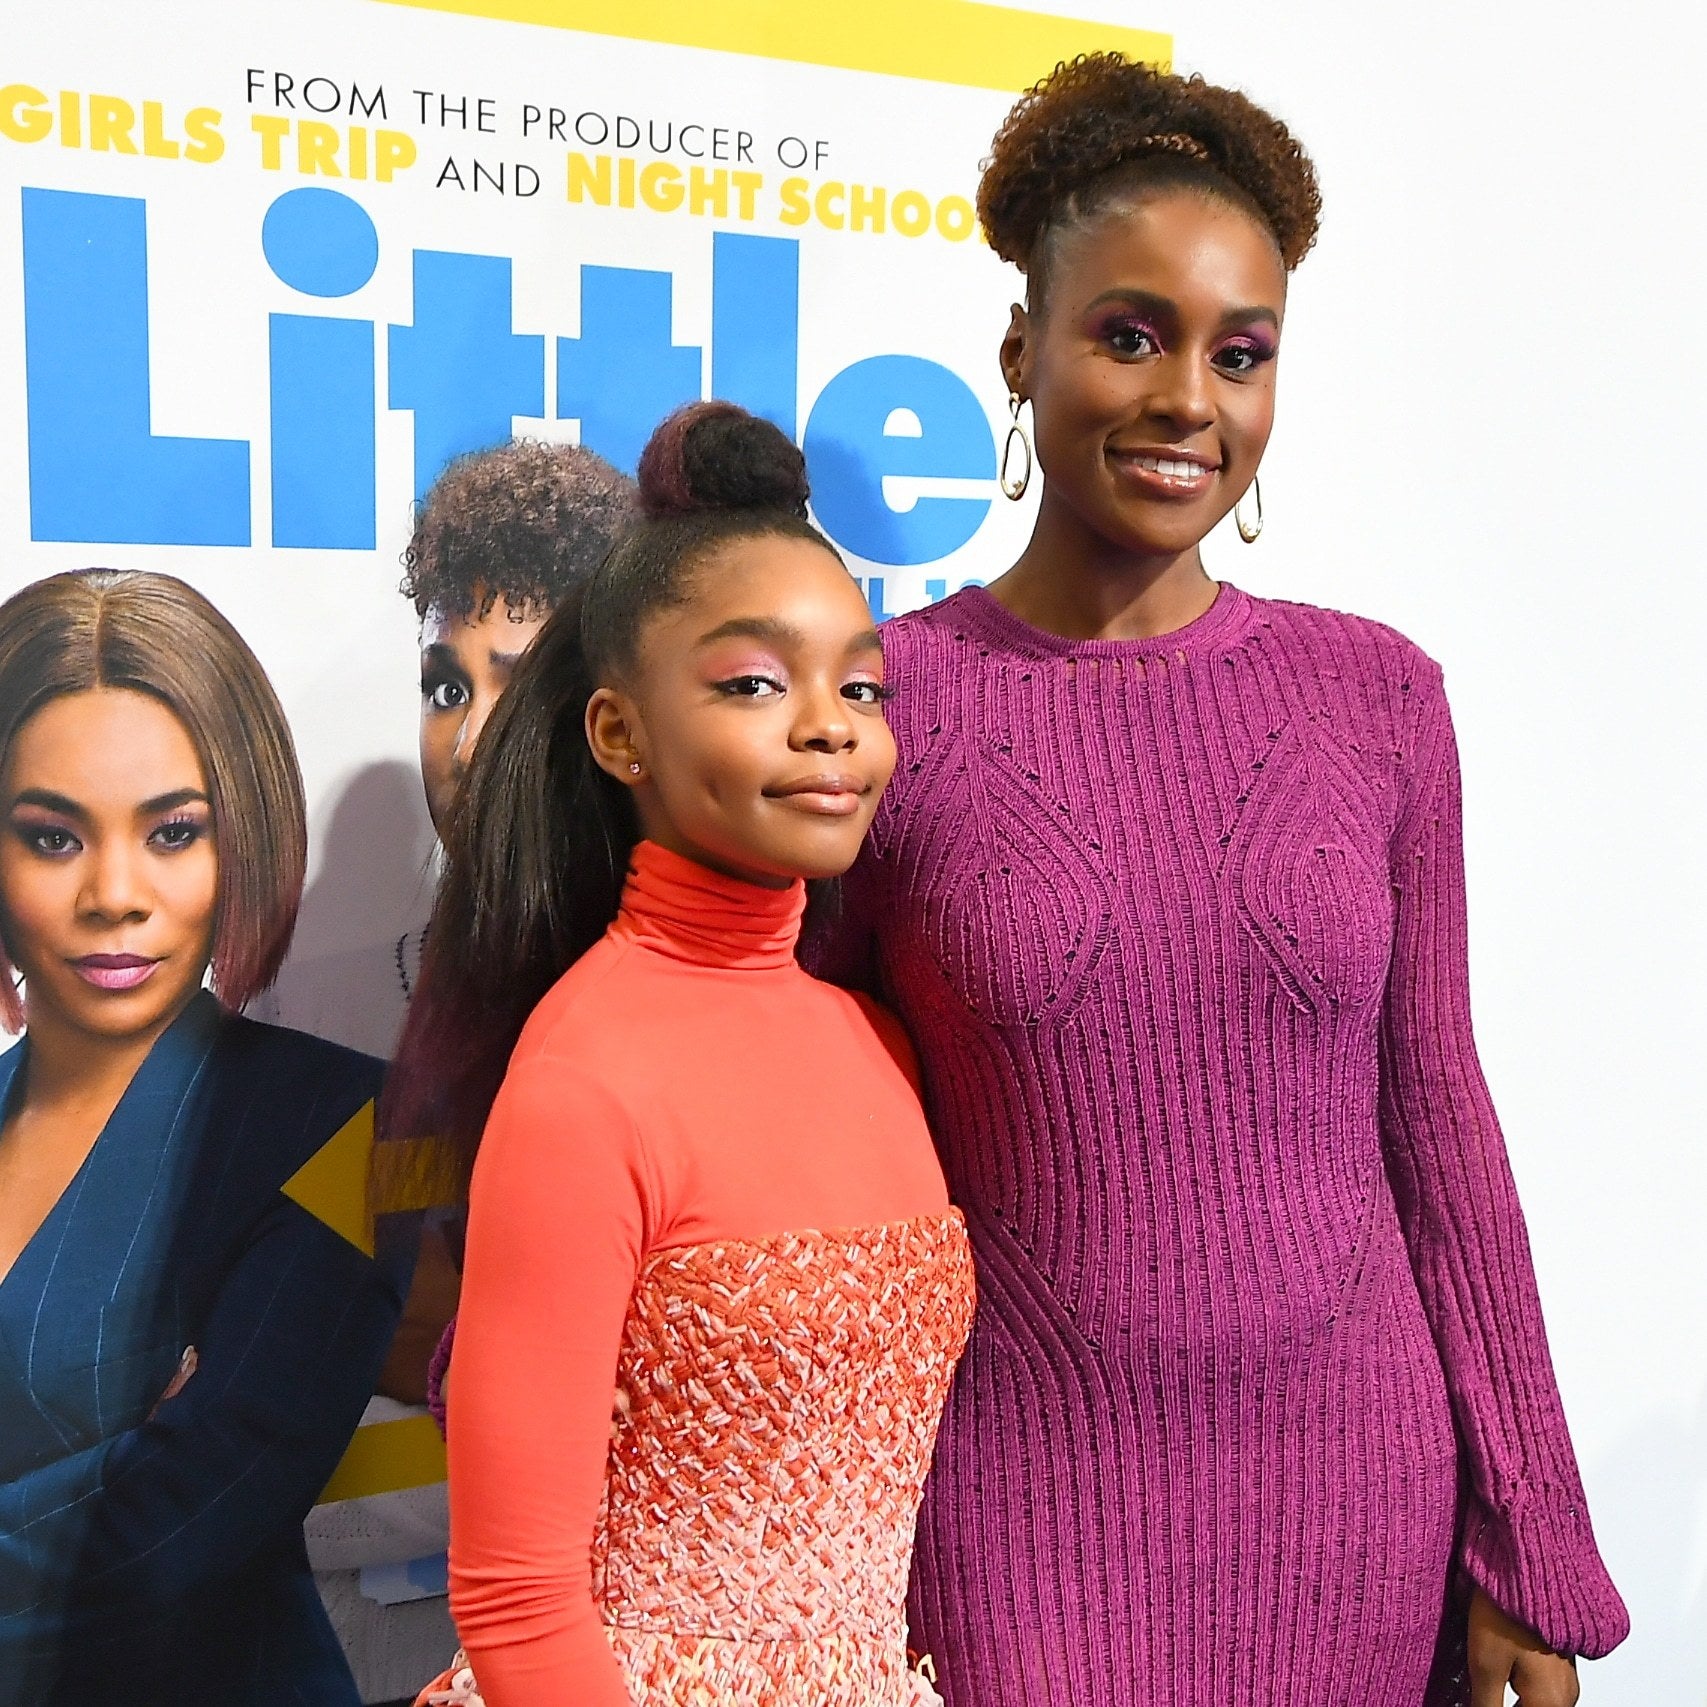 Marsai Martin And Issa Rae Want More Depictions Of Black Girlhood On-Screen